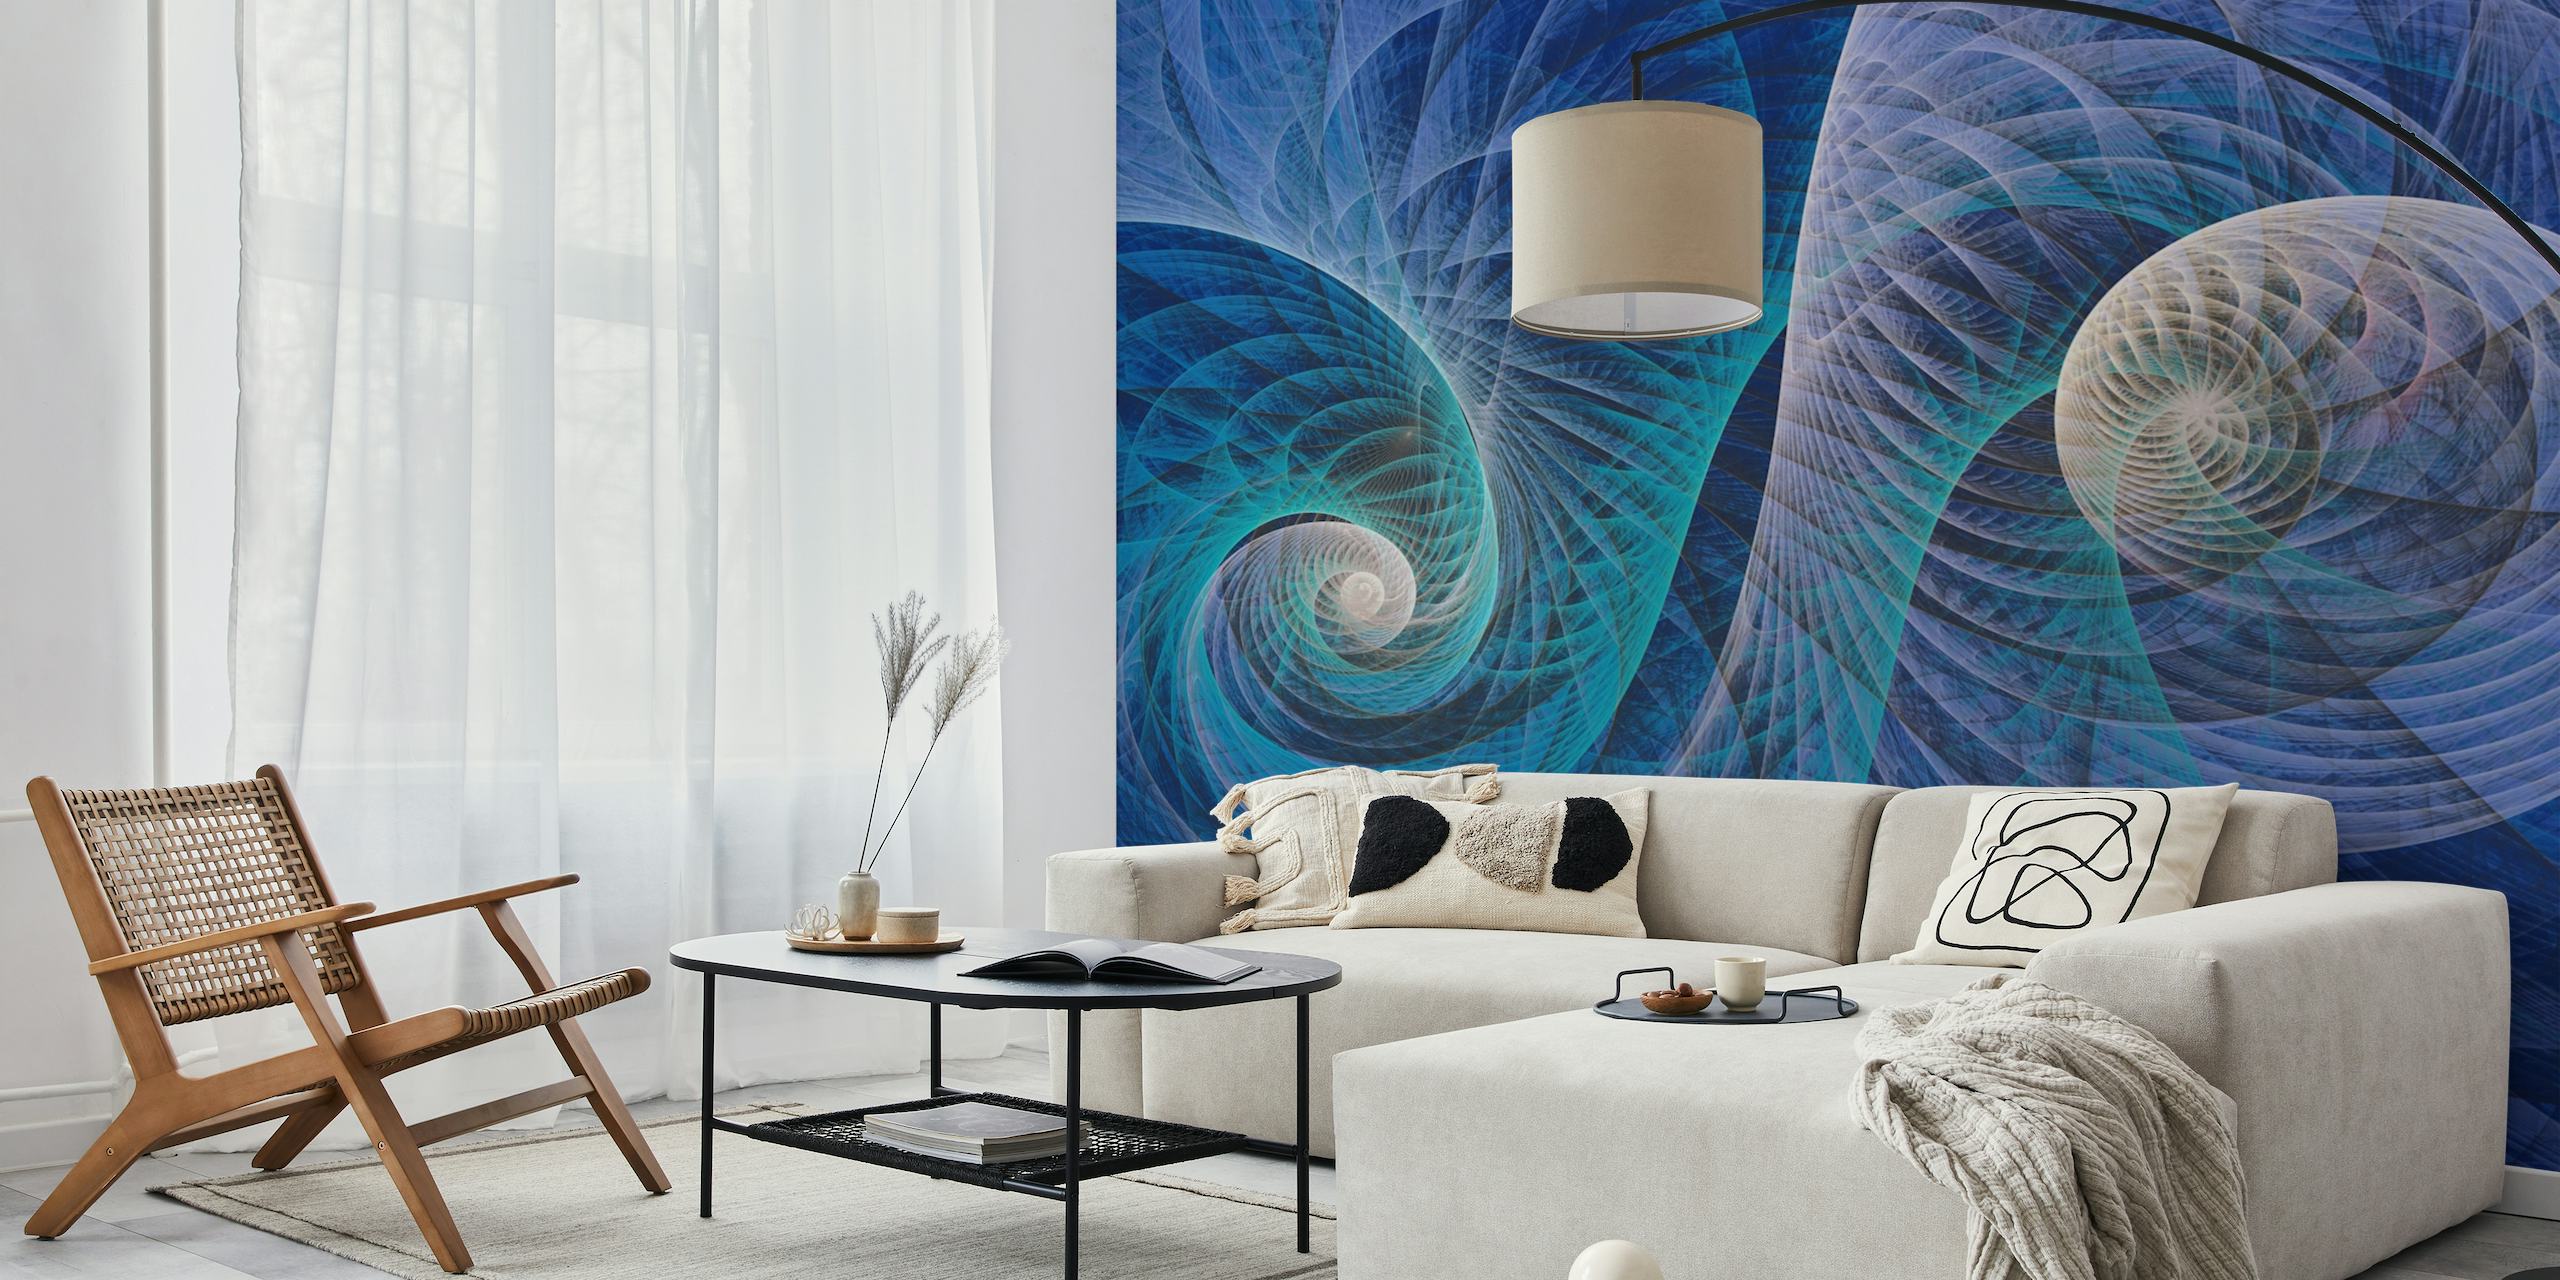 Abstract sea vortex pattern wall mural in blue tones